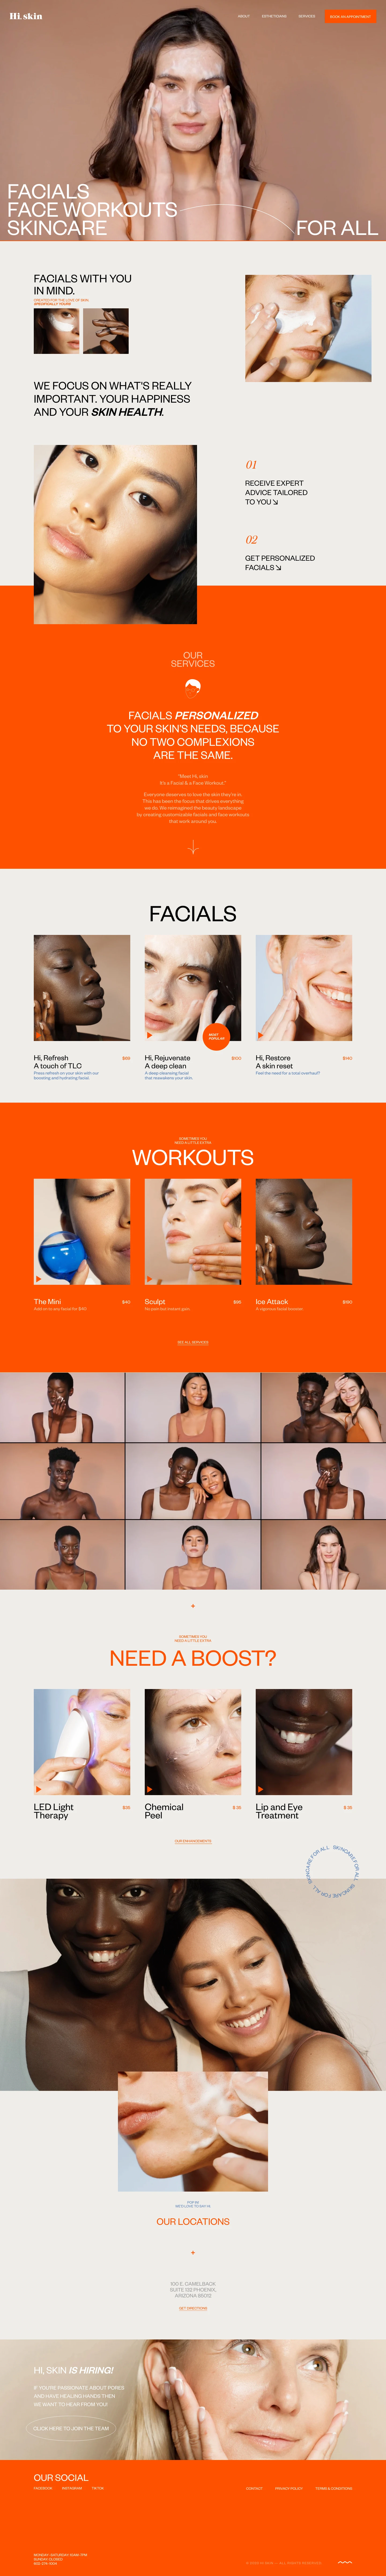 Hi, skin Landing Page Example: Meet Hi, skin Facials & Face Workouts. Everyone deserves to love the skin they're in. This has been the focus that drives everything we do. We reimagined the beauty landscape by creating customisable facials and face workouts that work around you.